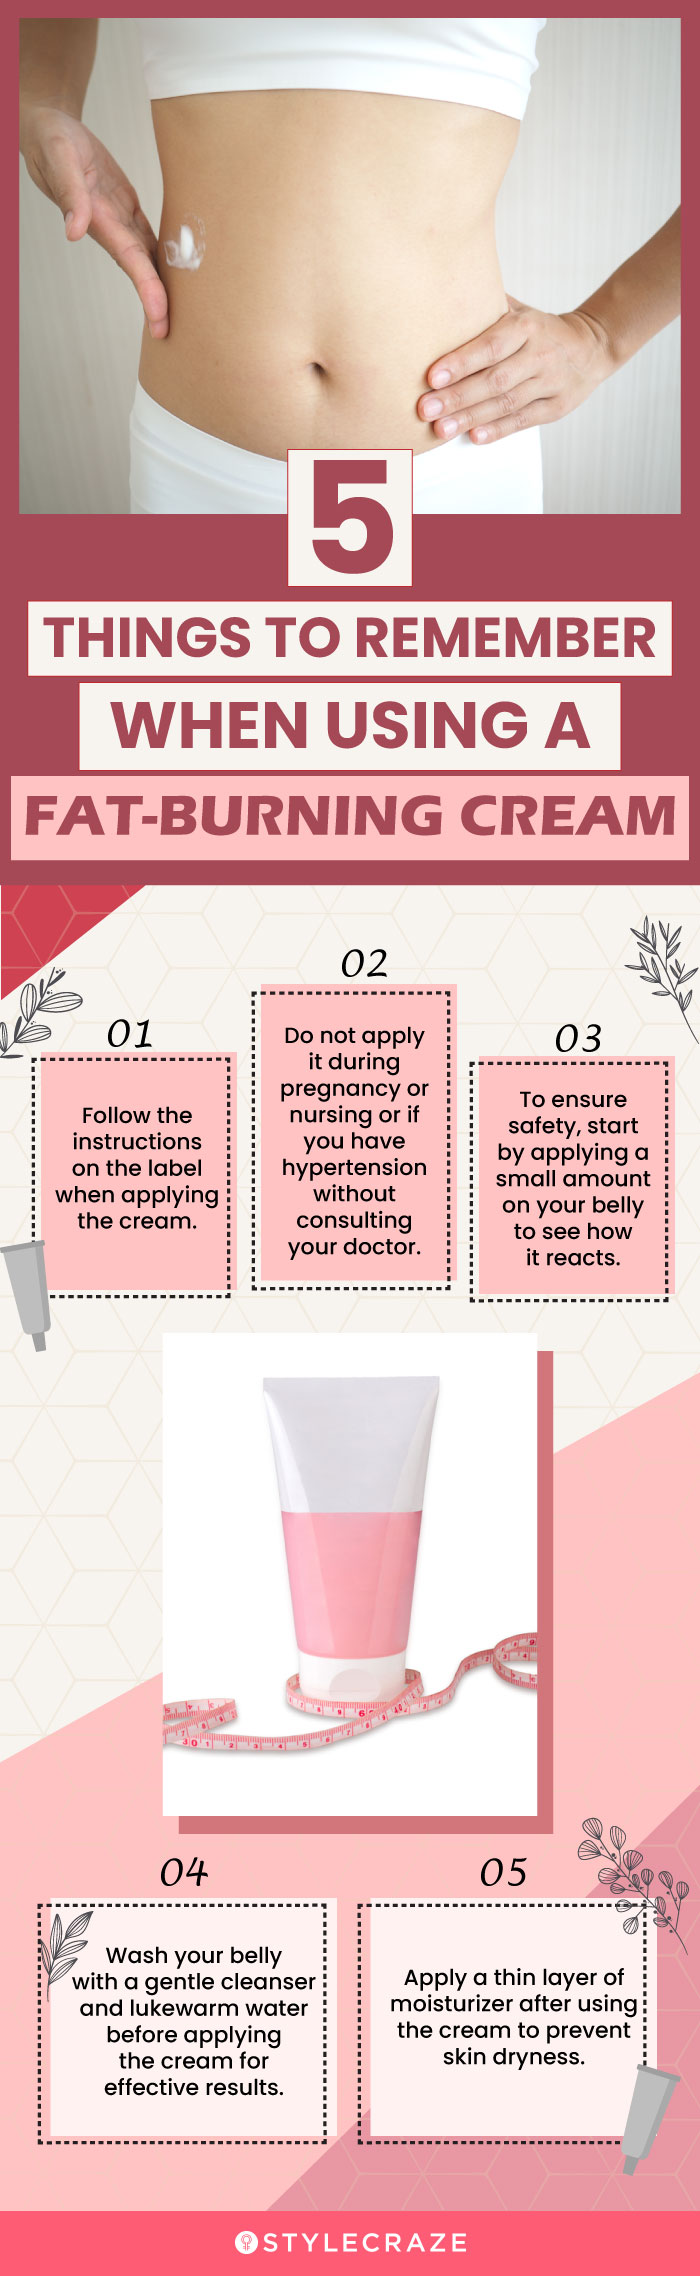 Things To Remember When Using A Fat-Burning Cream (infographic)